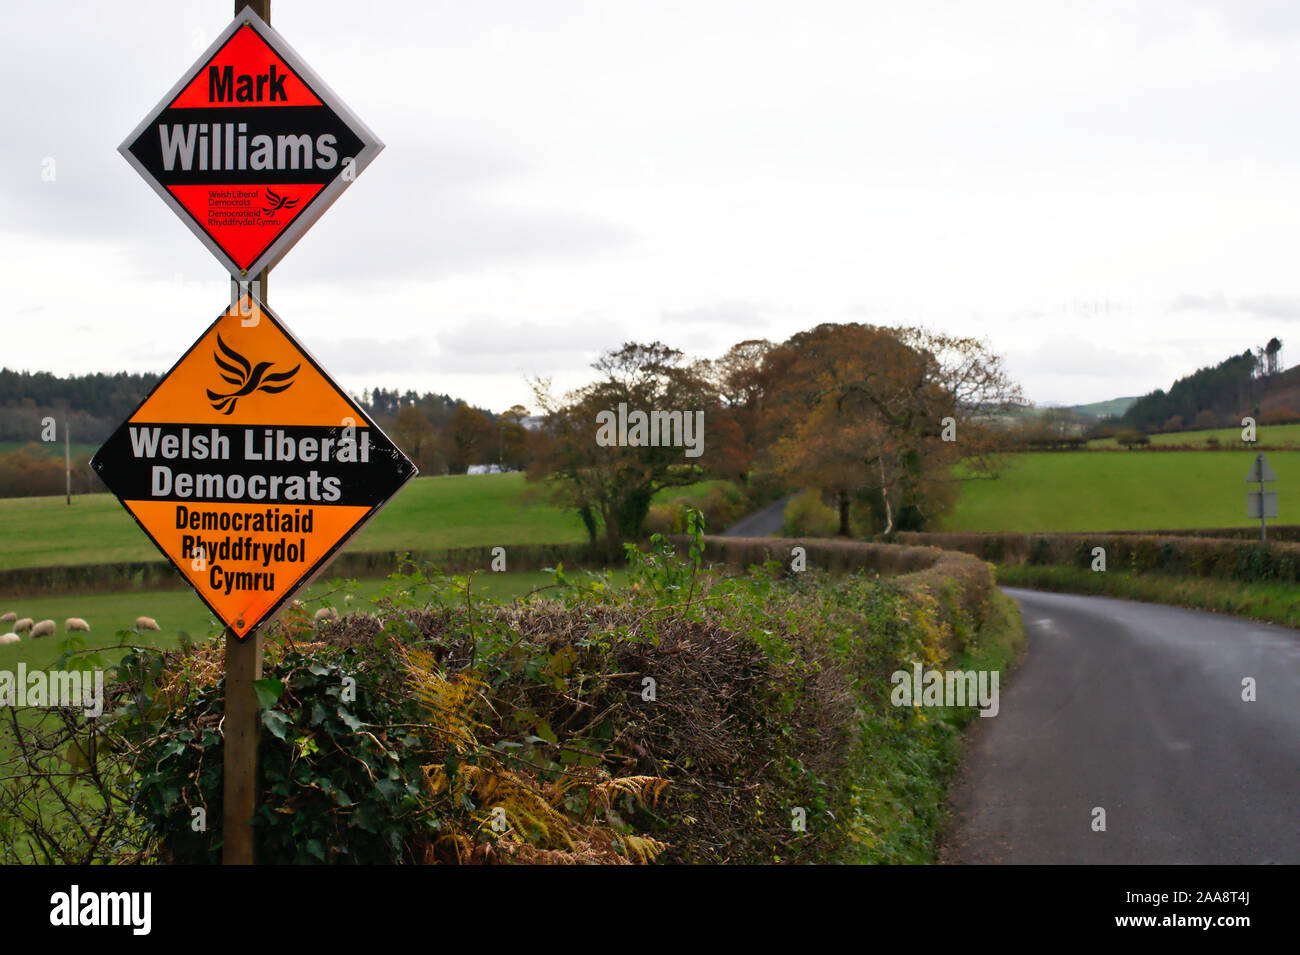 Visible support for the Welsh Liberal Democrats candidate Mark Williams in the marginal constituency of Ceredigion in rural Mid Wales UK  Election Stock Photo